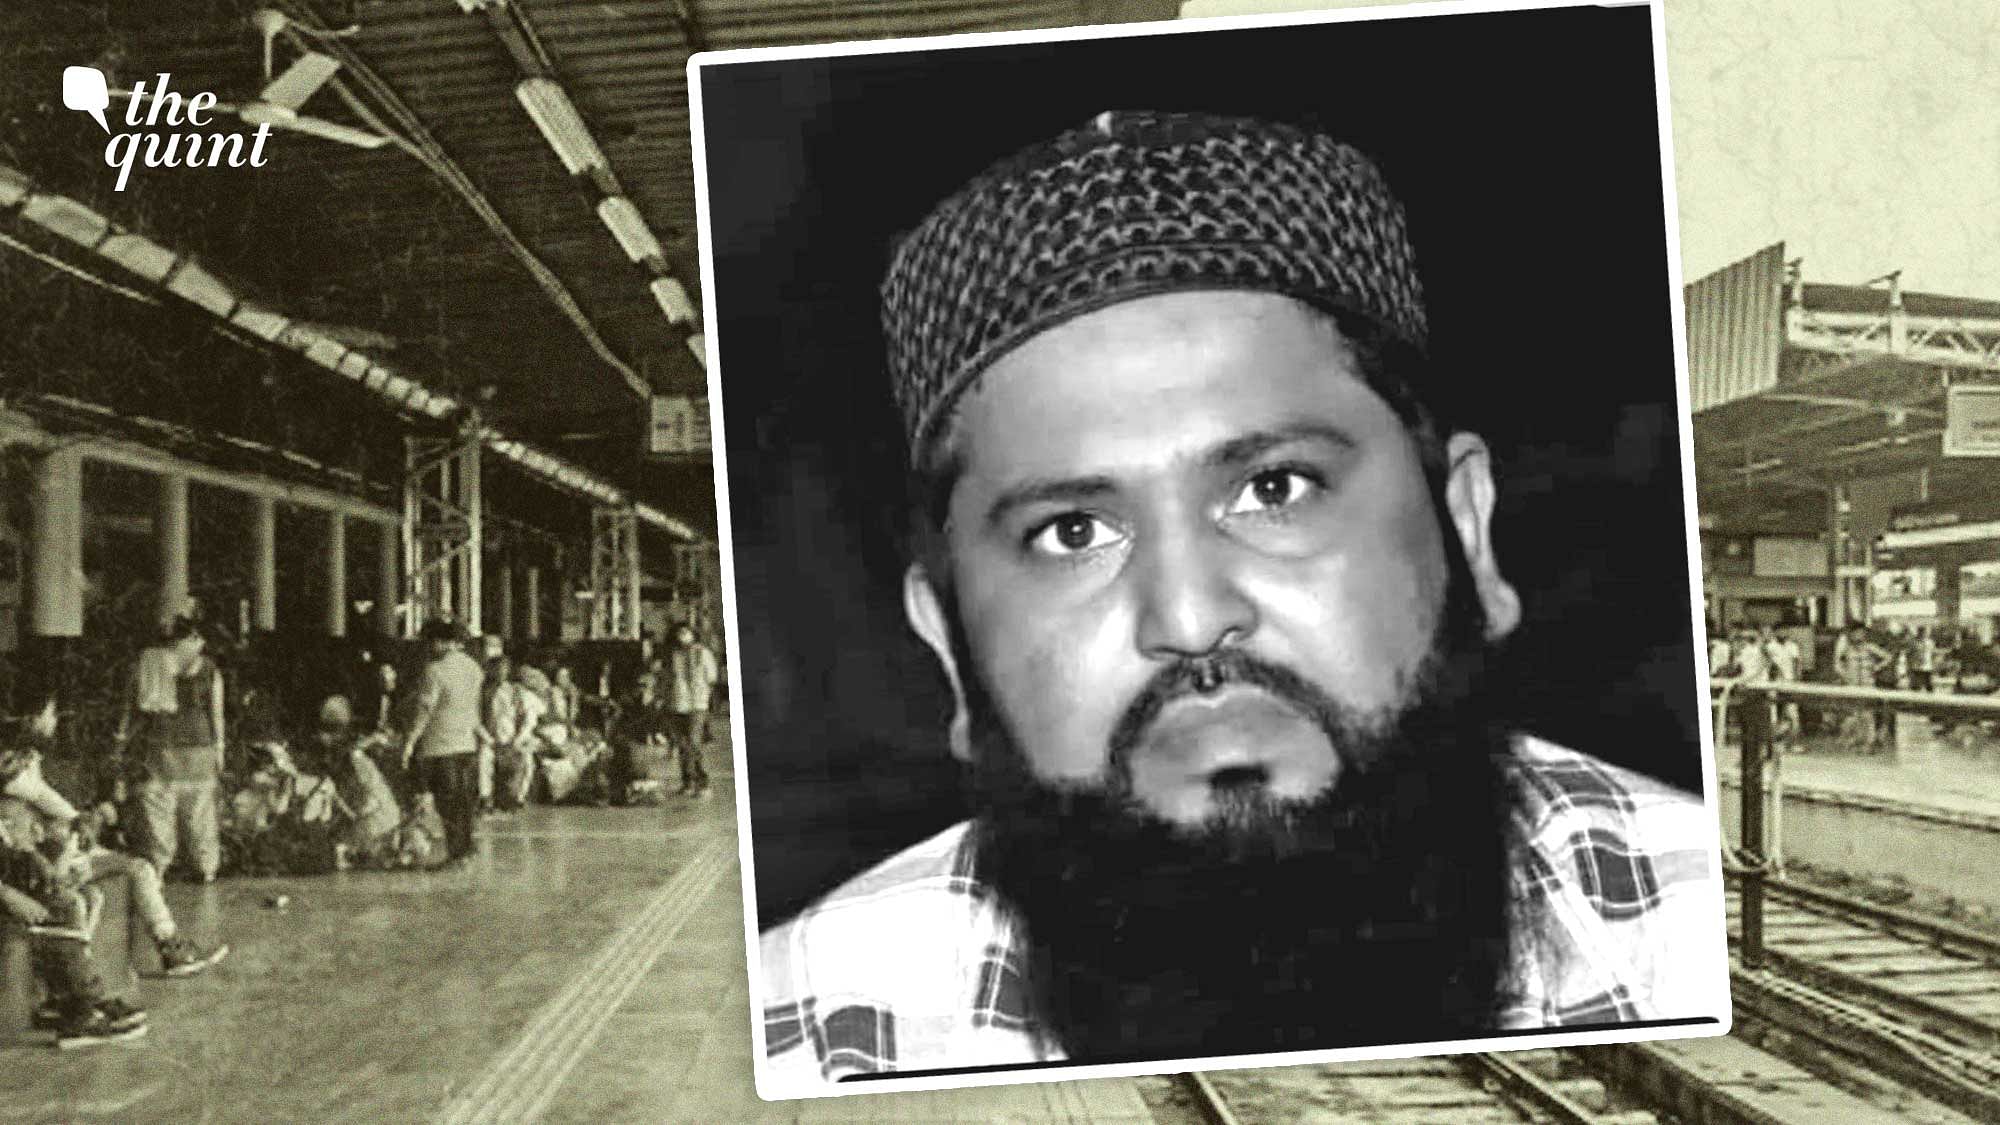 <div class="paragraphs"><p>RPF constable Chetan Singh shot and killed four people on board the Jaipur-Mumbai Superfast Express. The kin of one of the victims - Syed Saifuddin - claims the incident was a terror attack and that the victim was asked his name before being shot.</p></div>